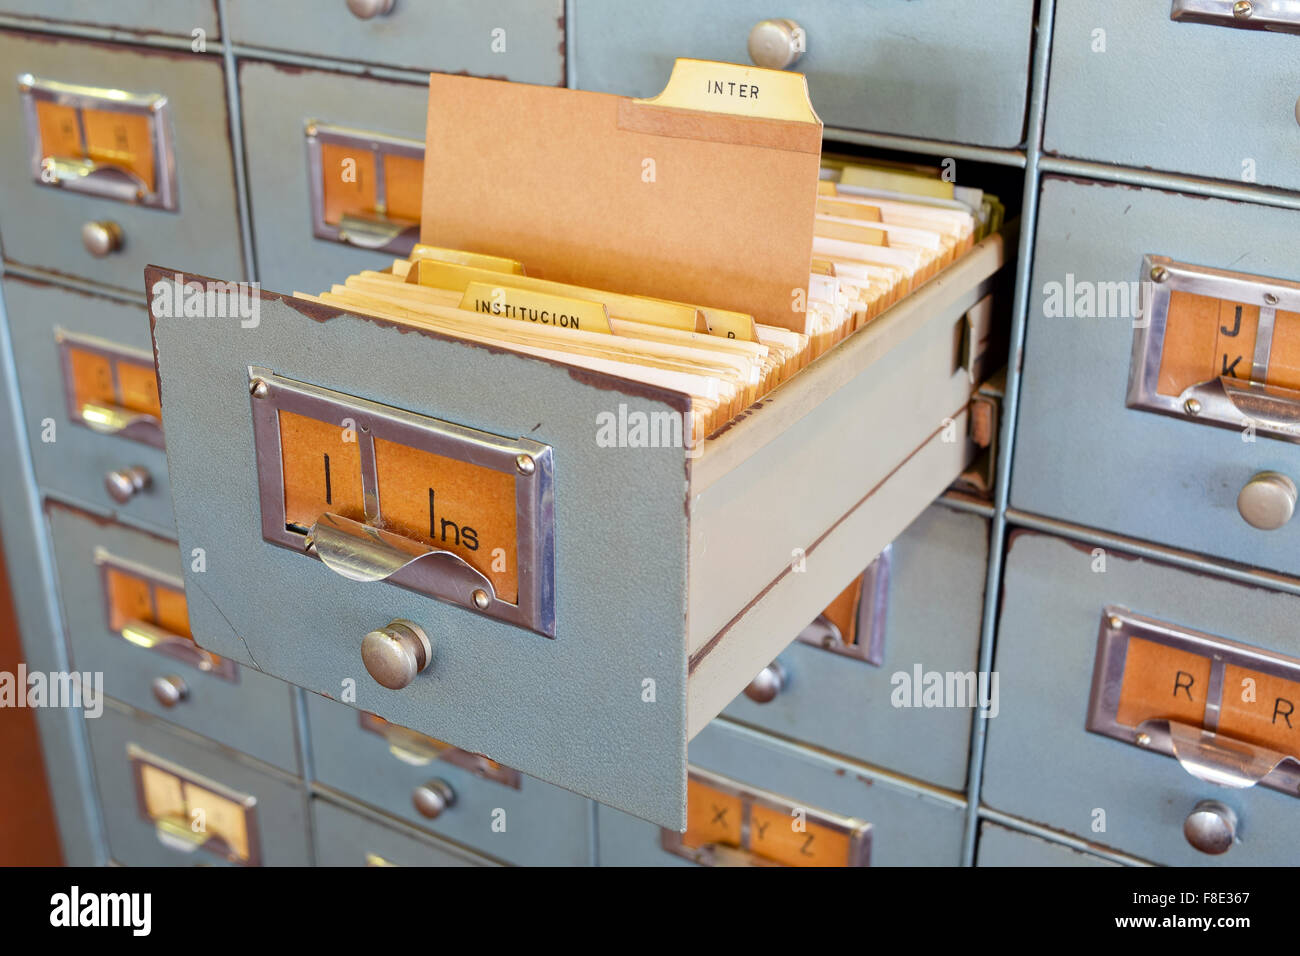 Filing Cabinet With Single Drawer Opened File Document Stock